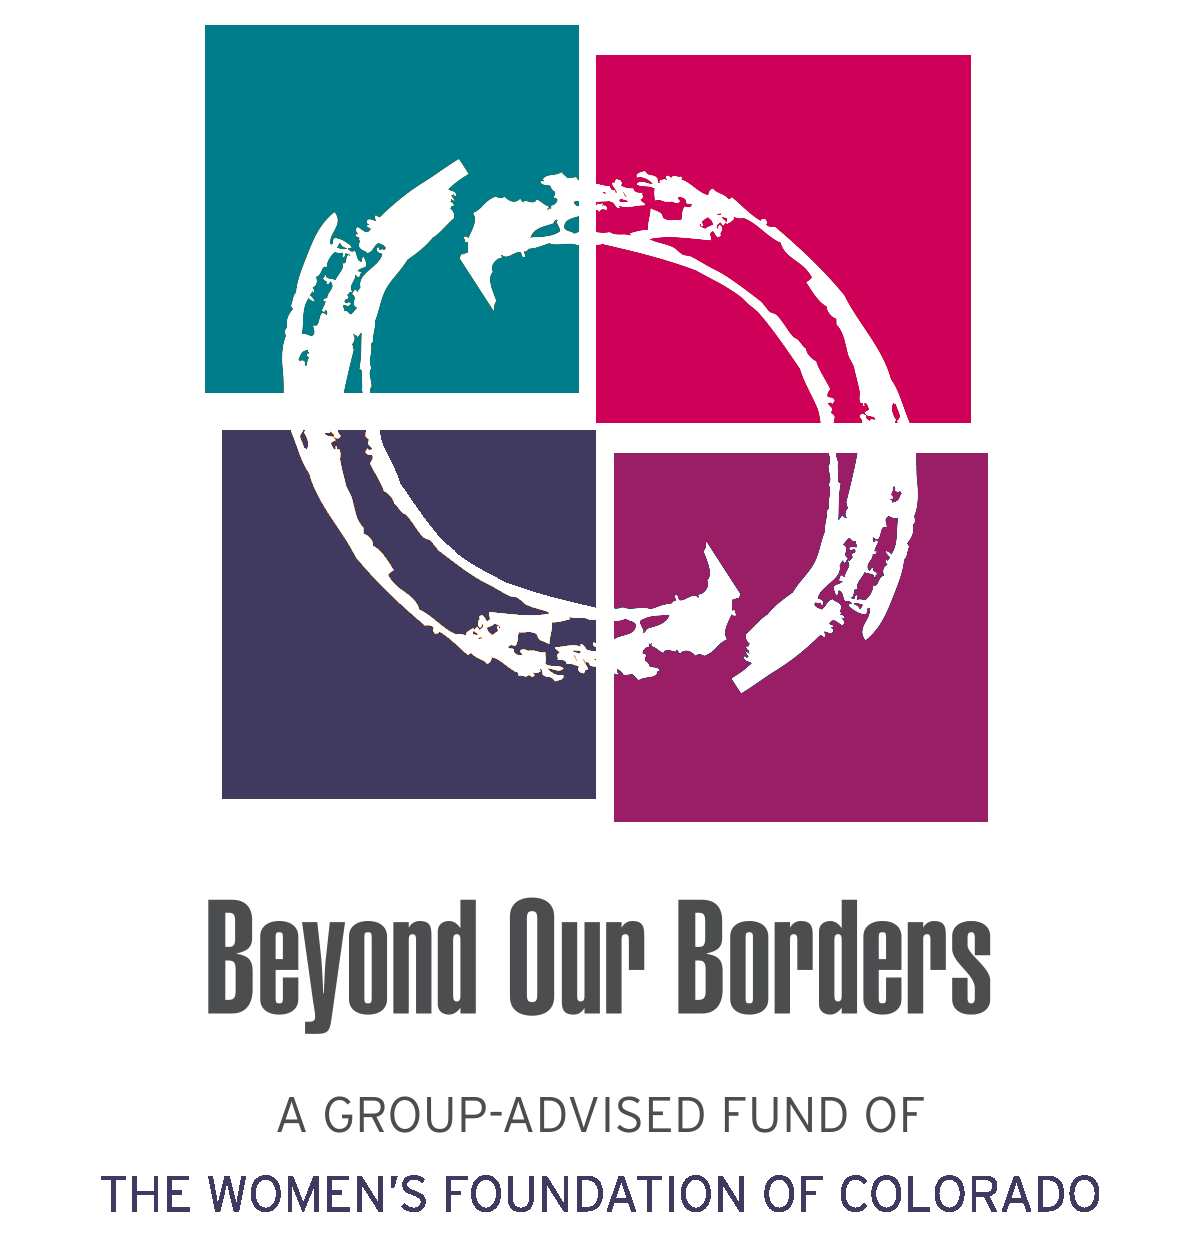 Borders Logo - Beyond Our Borders Women's Foundation of Colorado